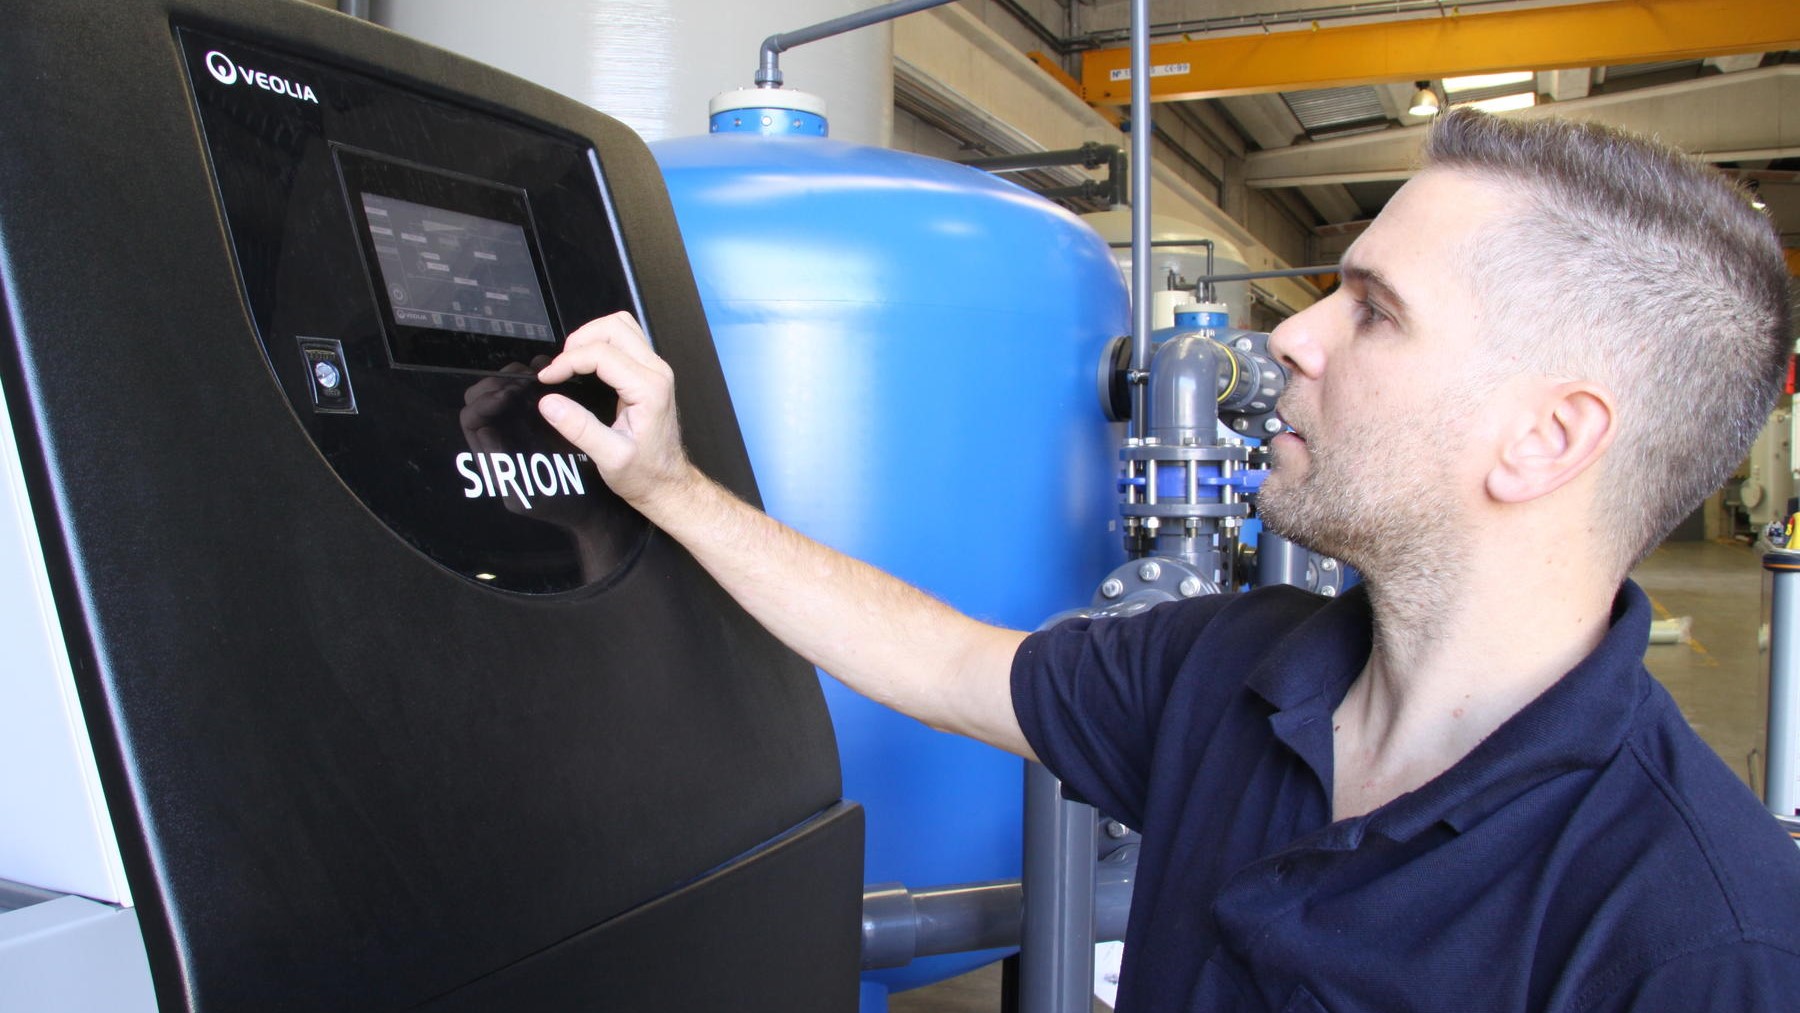 Veolia launches Sirion Pro reverse osmosis system